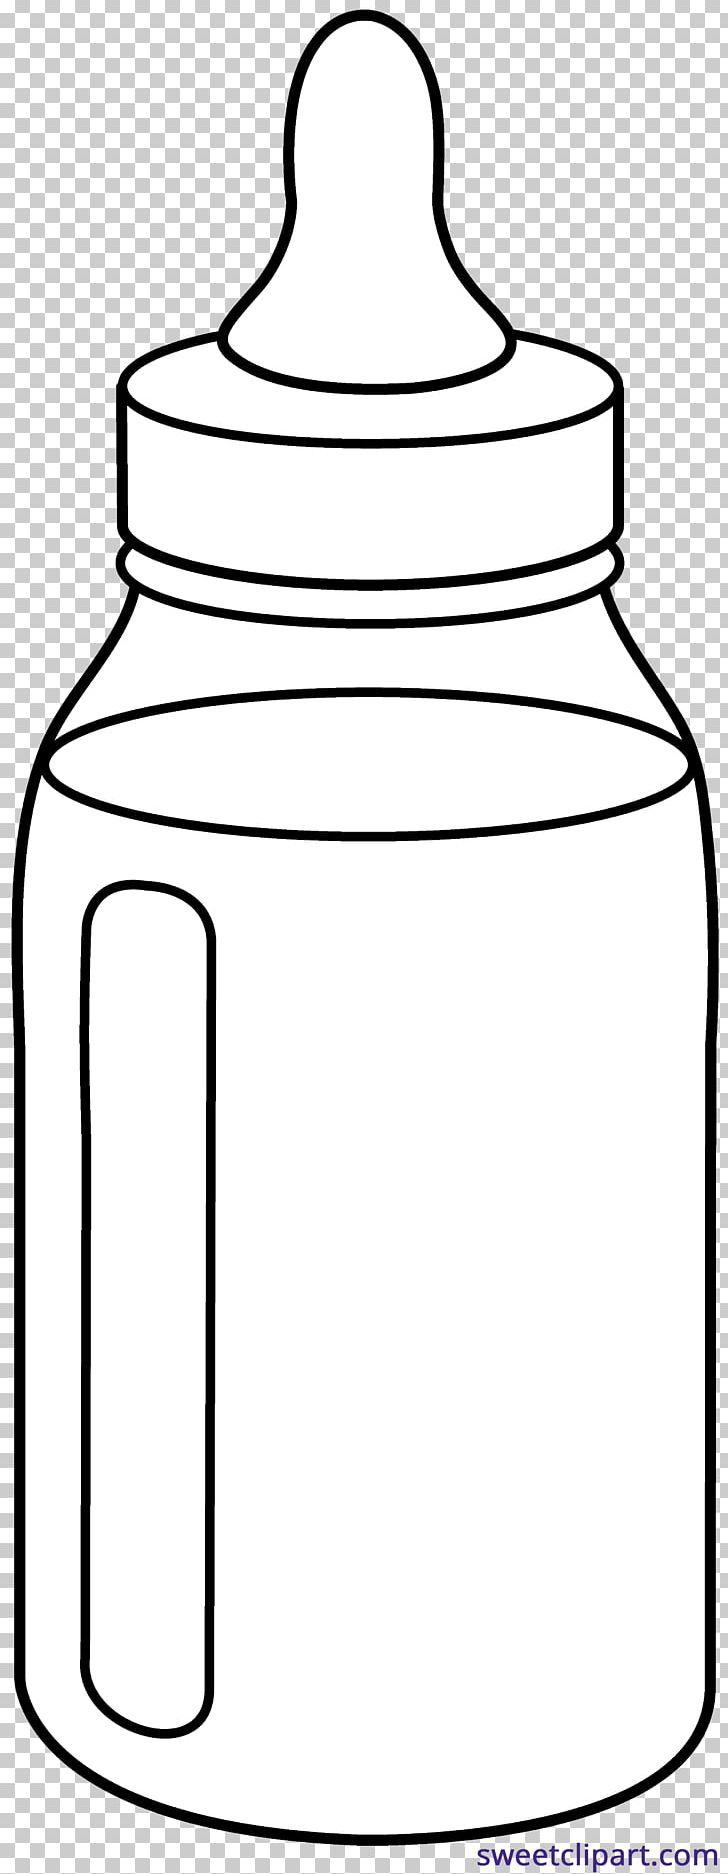 Baby Food Baby Bottles Infant Open PNG, Clipart, Baby Bottle, Baby Bottles, Baby Food, Black, Black And White Free PNG Download